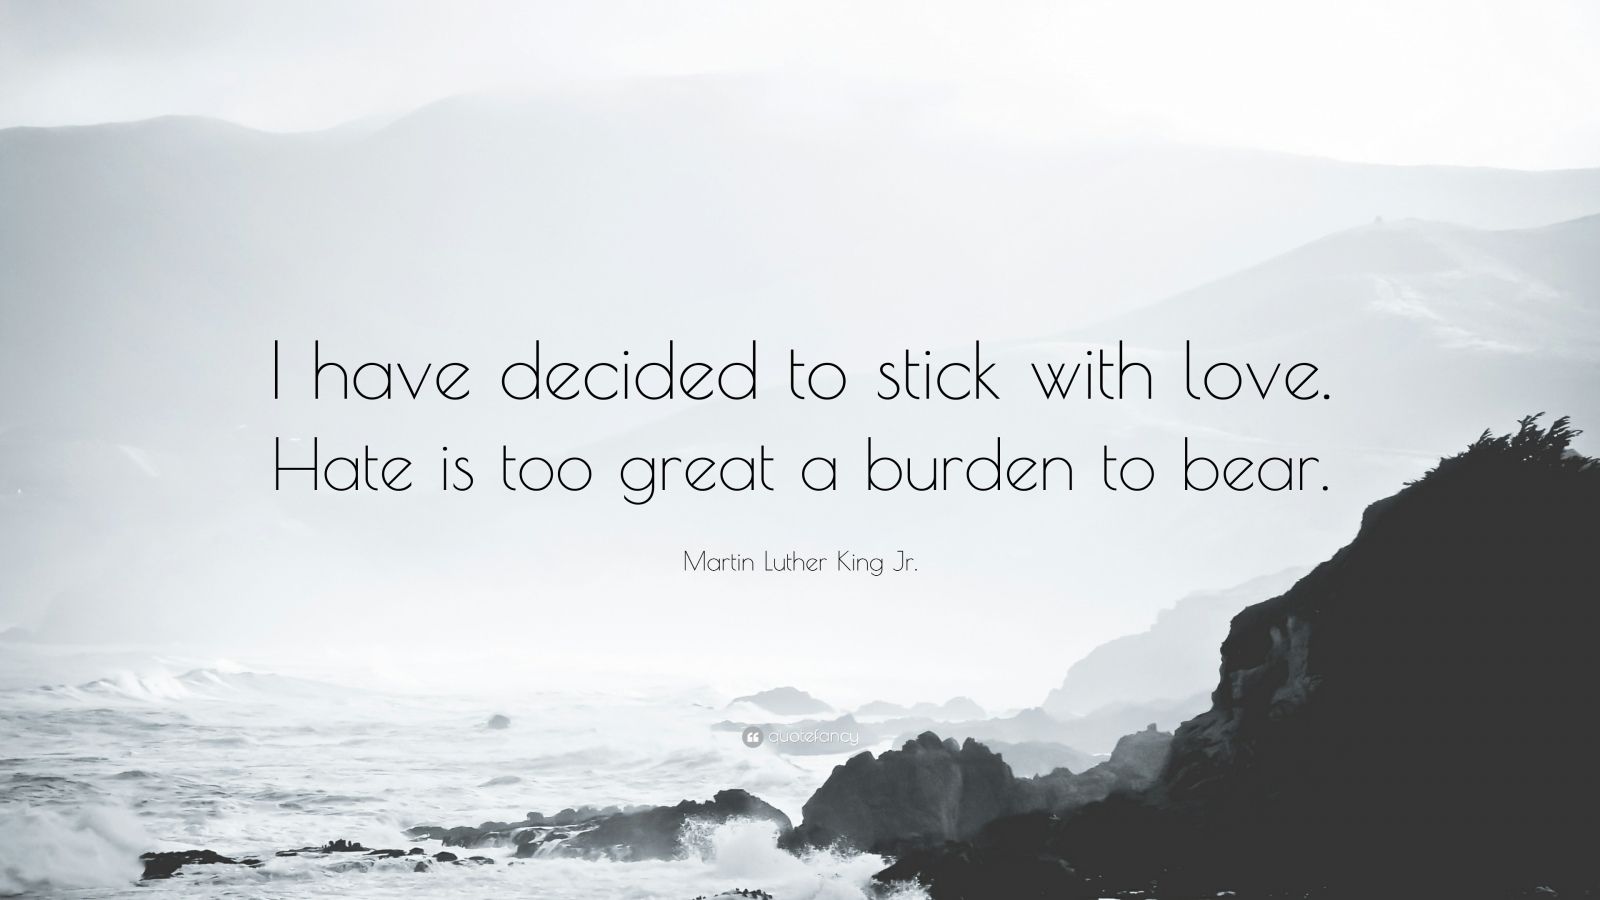 Martin Luther King Jr Quote “I have decided to stick with love